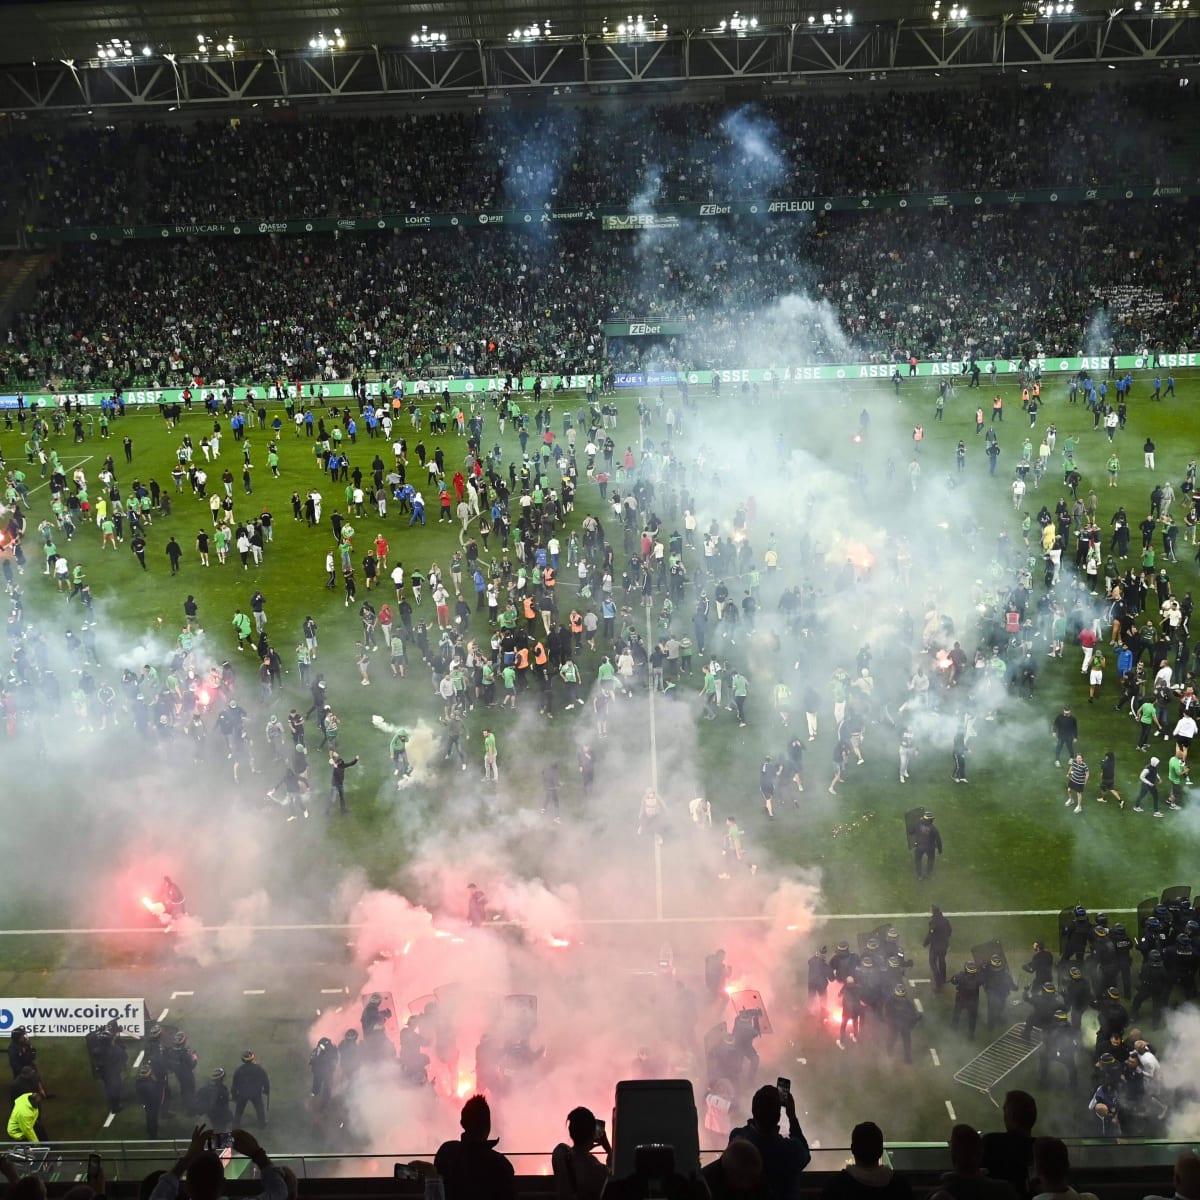 Saint-Etienne Field, Flares at Players (Video) - Illustrated